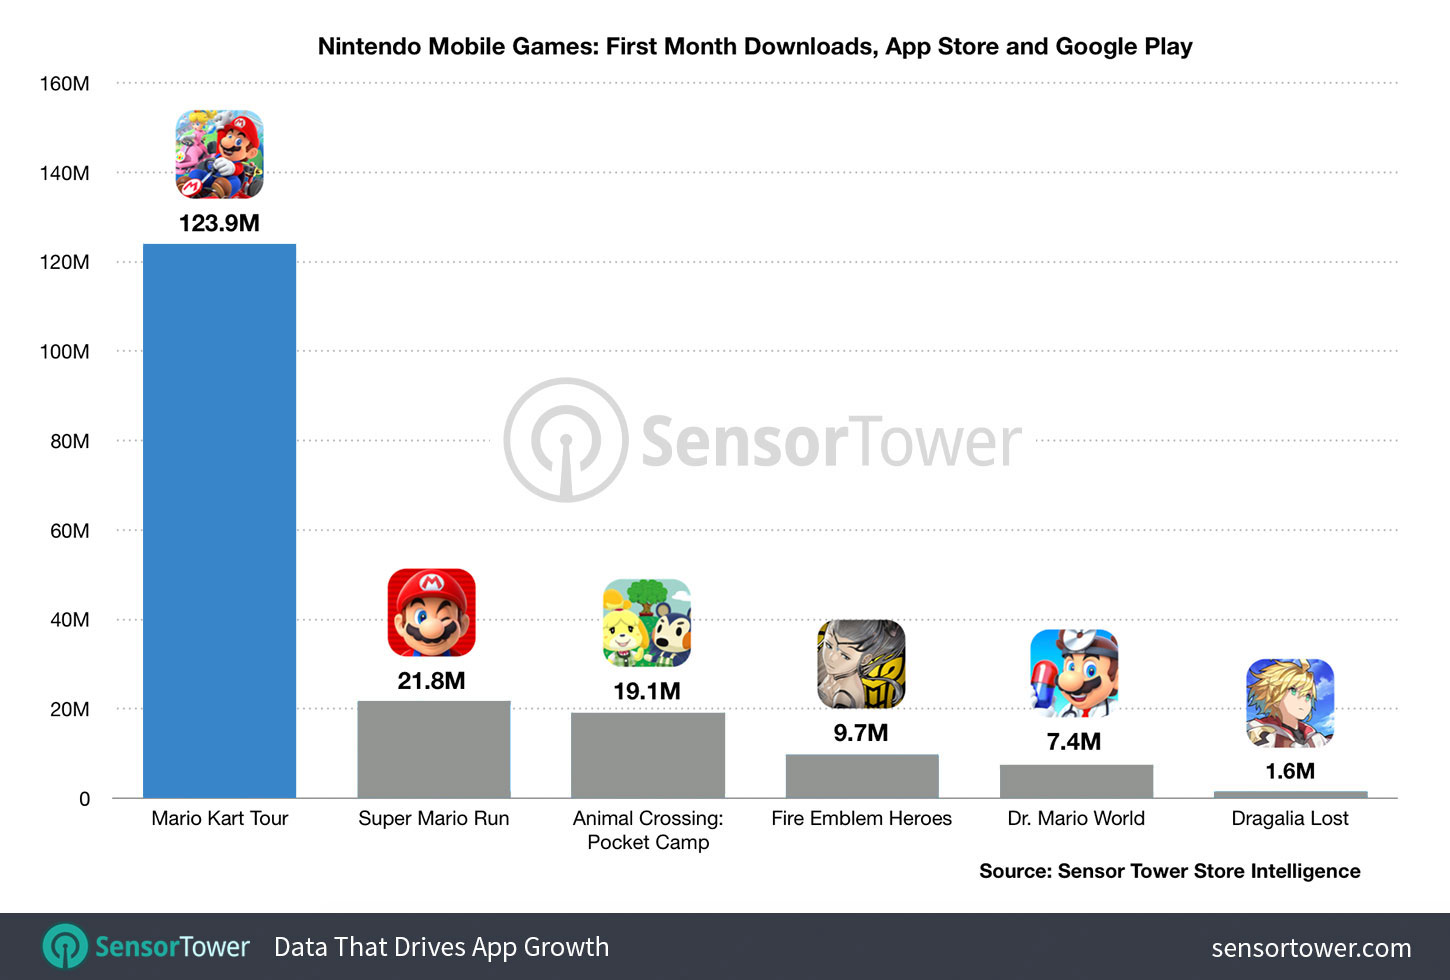 Nintendo Mobile Games: First Month Downloads, App Store and Google Play